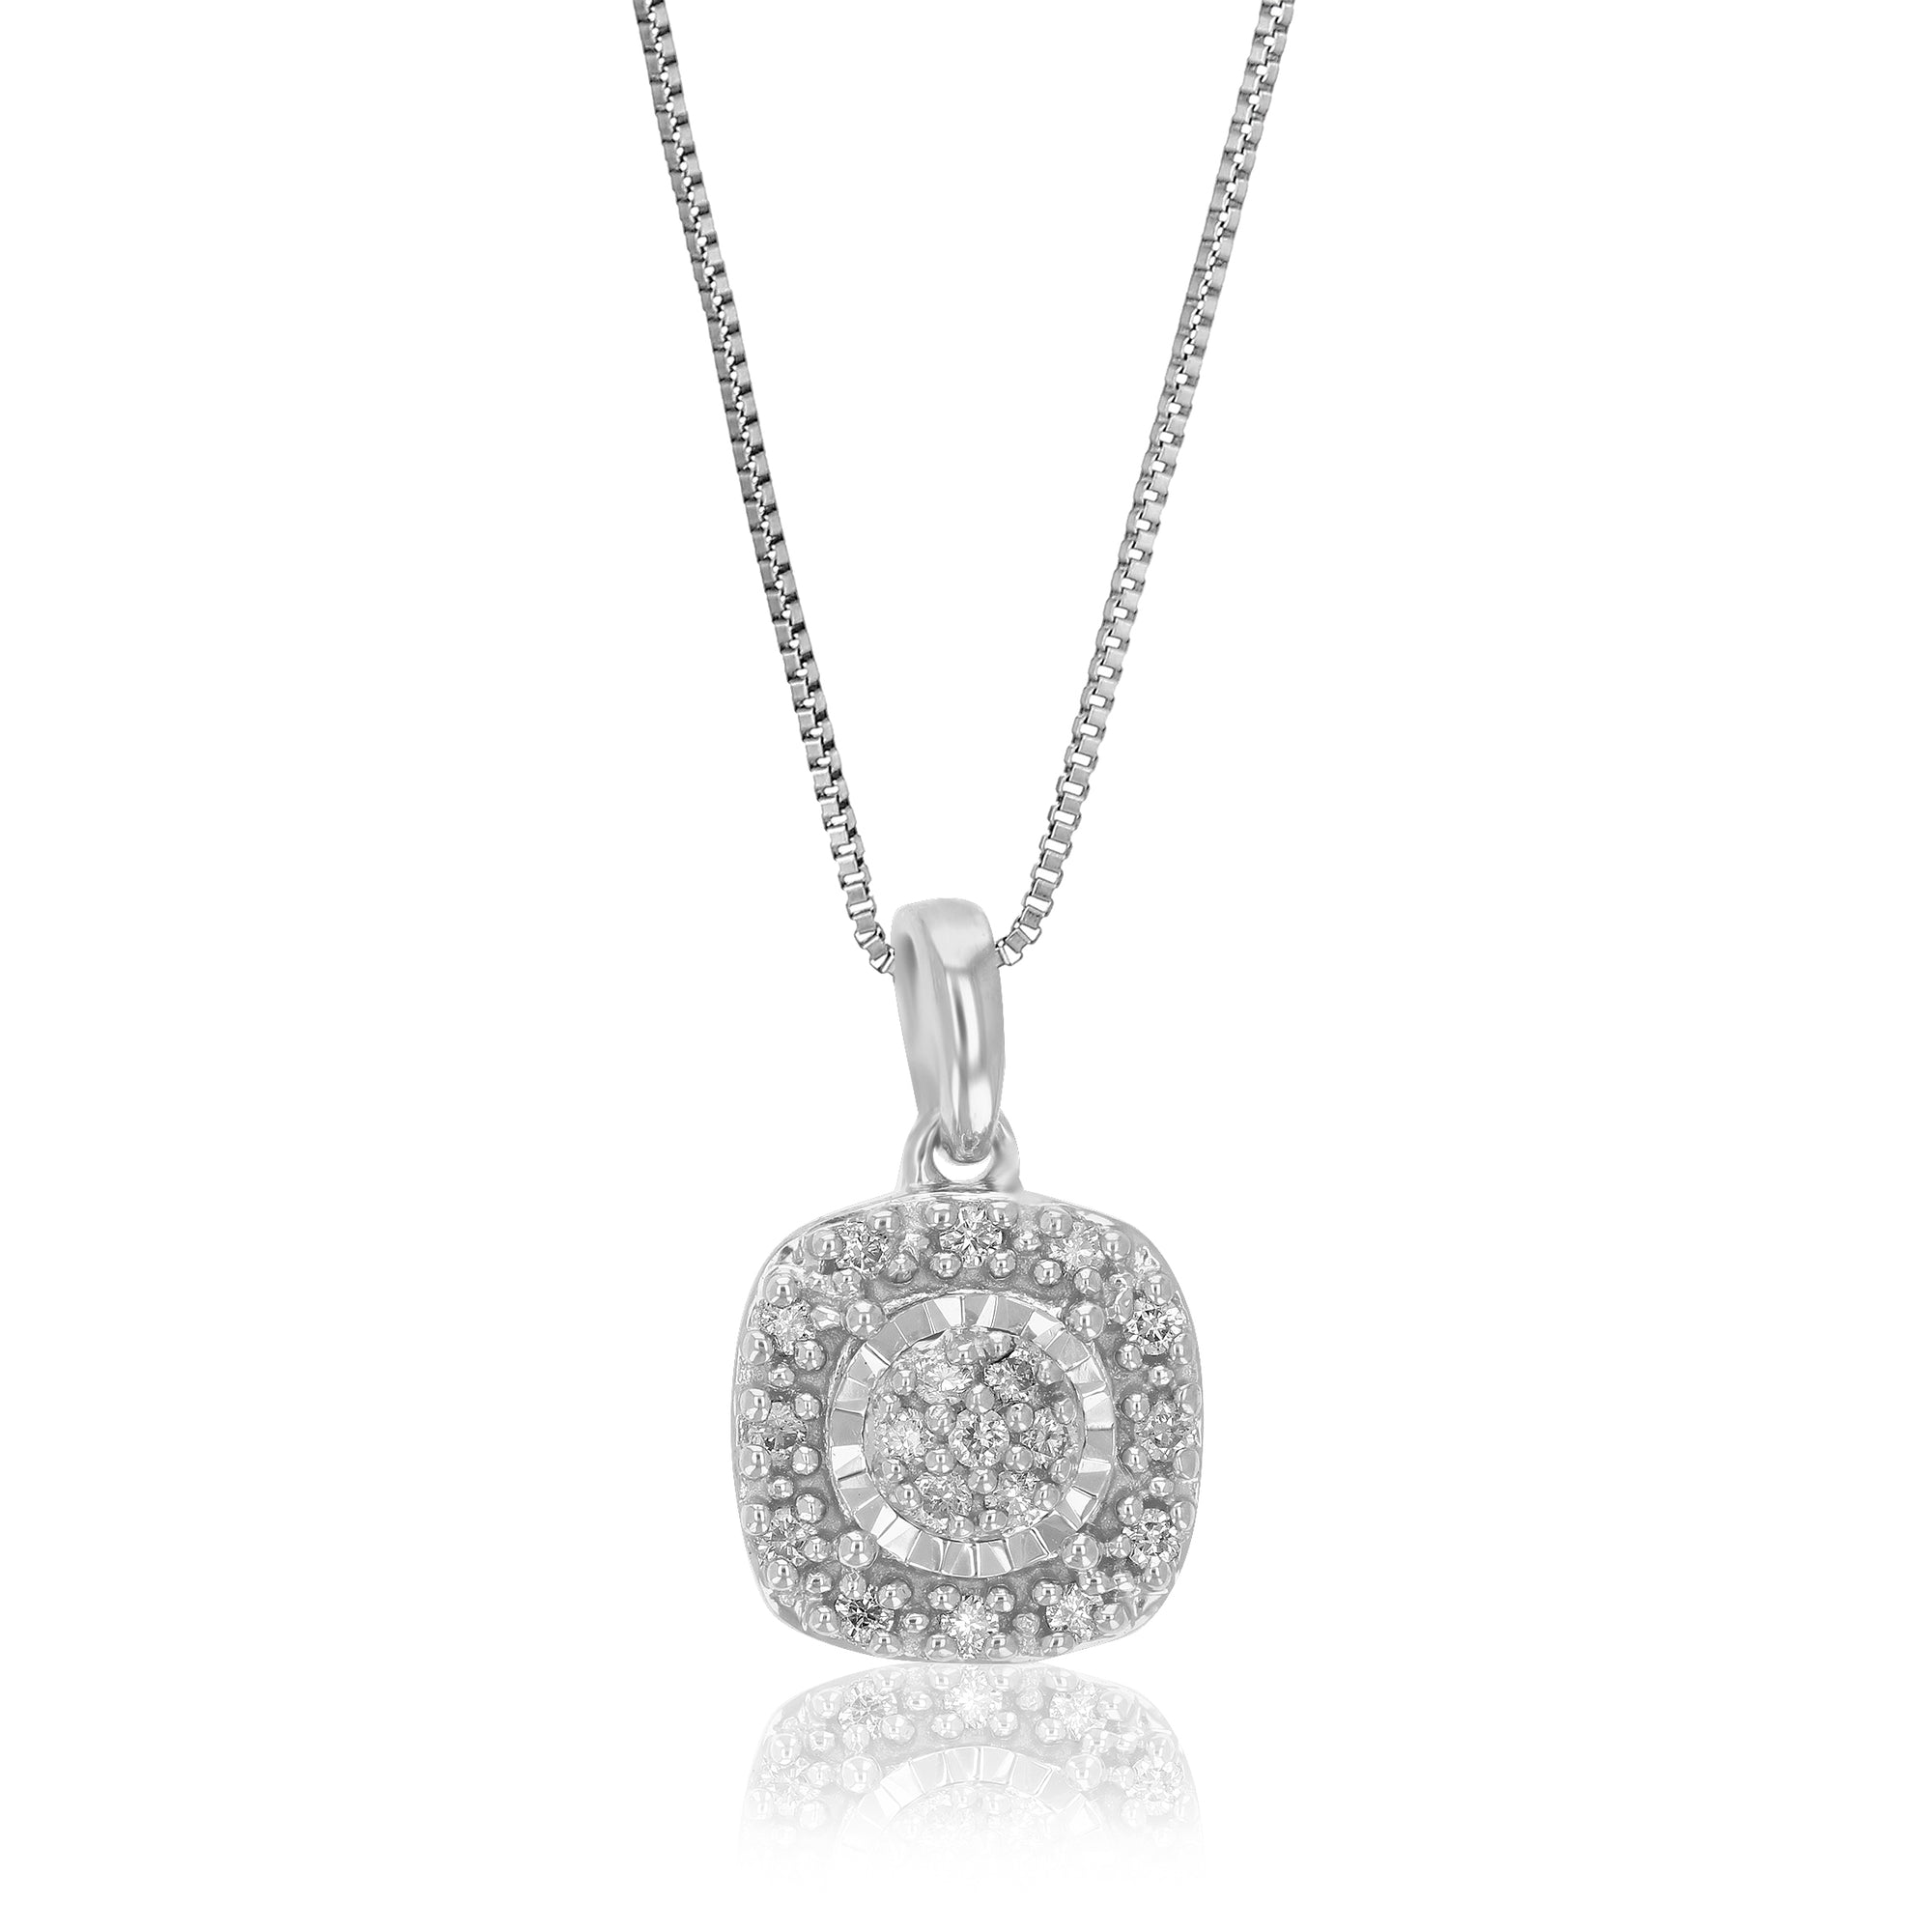 1/12 cttw Diamond Pendant Necklace for Women, Lab Grown Diamond Square Pendant Necklace in .925 Sterling Silver with Chain, Size 1/2 Inch